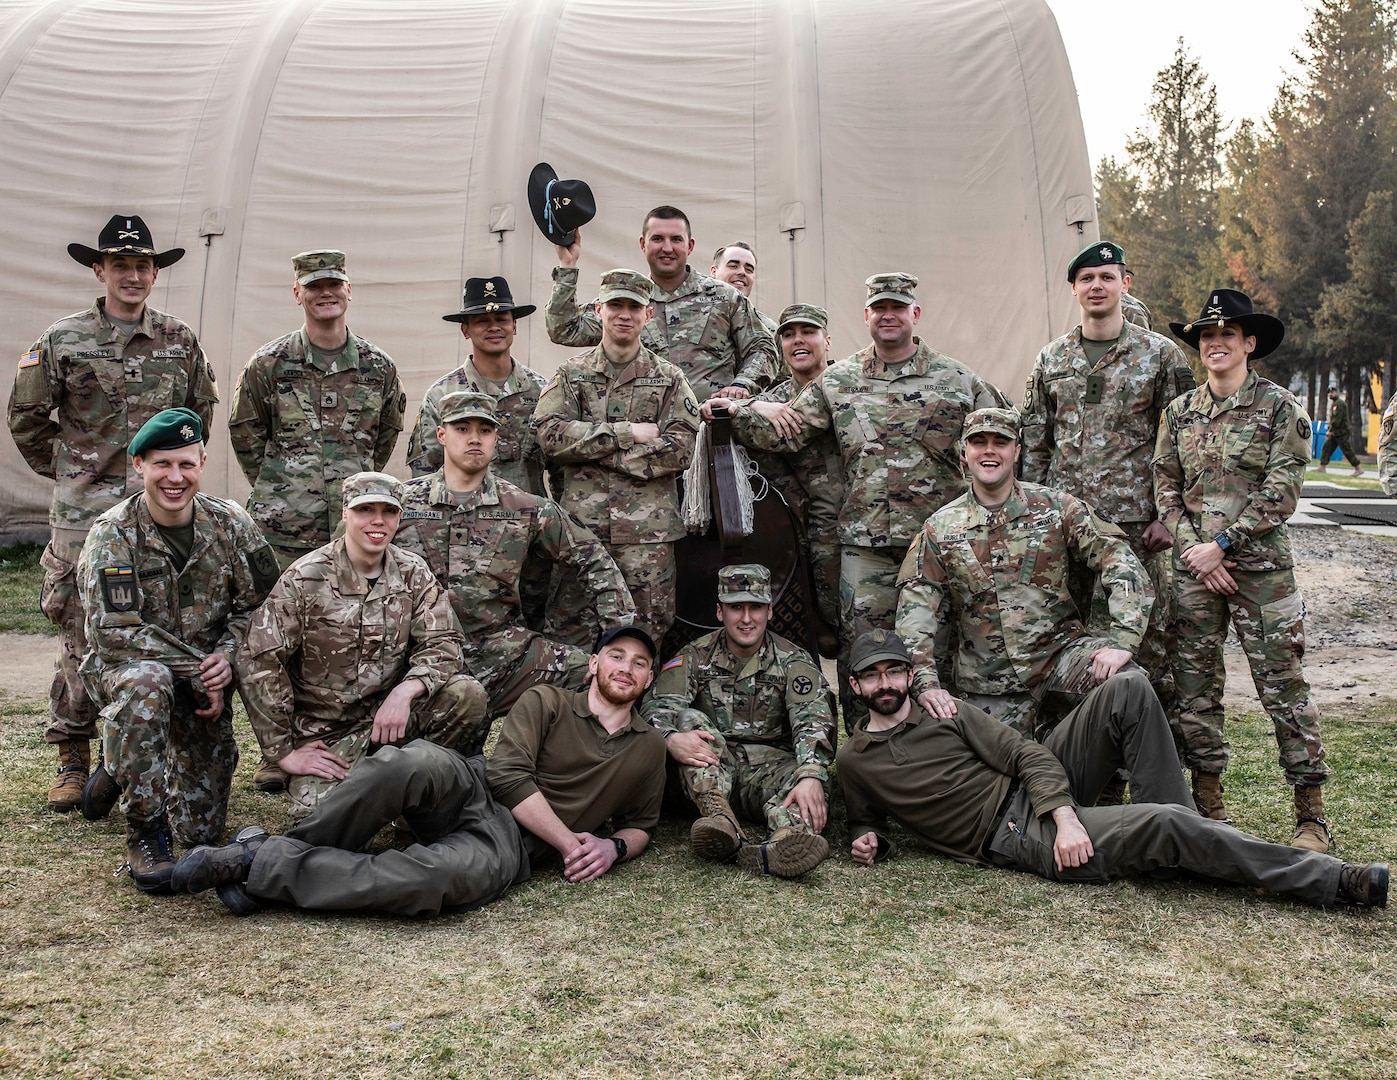 Group photo of the newly spurred troopers after the Order of the Spur induction ceremony held at the Yavoriv Combat training Center, Ukraine, April 8, 2019.